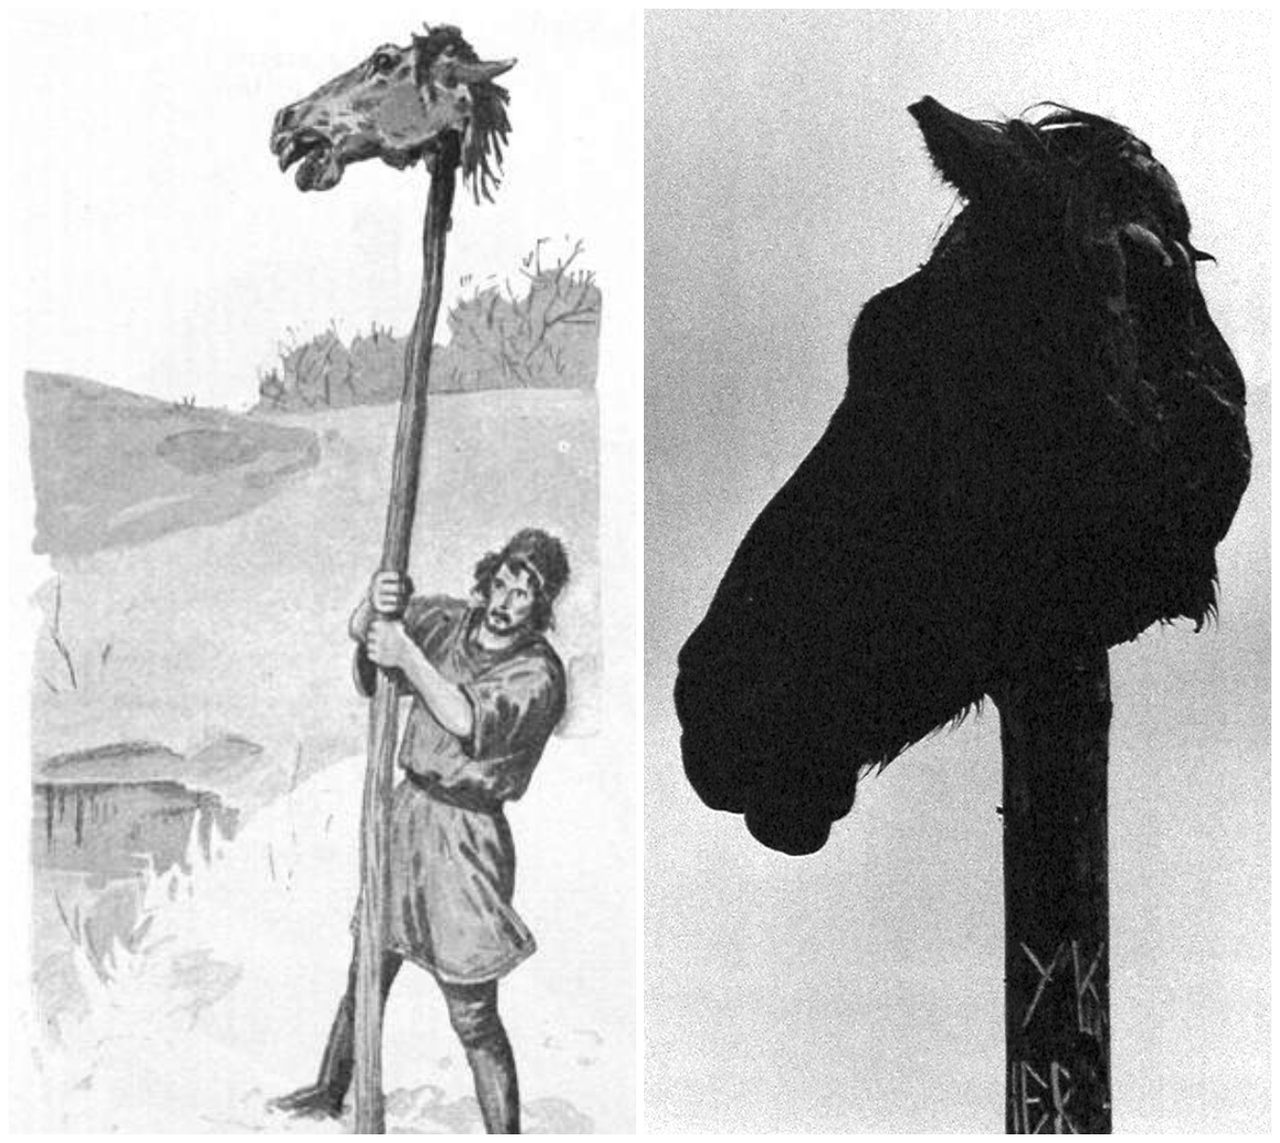 More people are mounting horse heads on poles throughout Iceland.